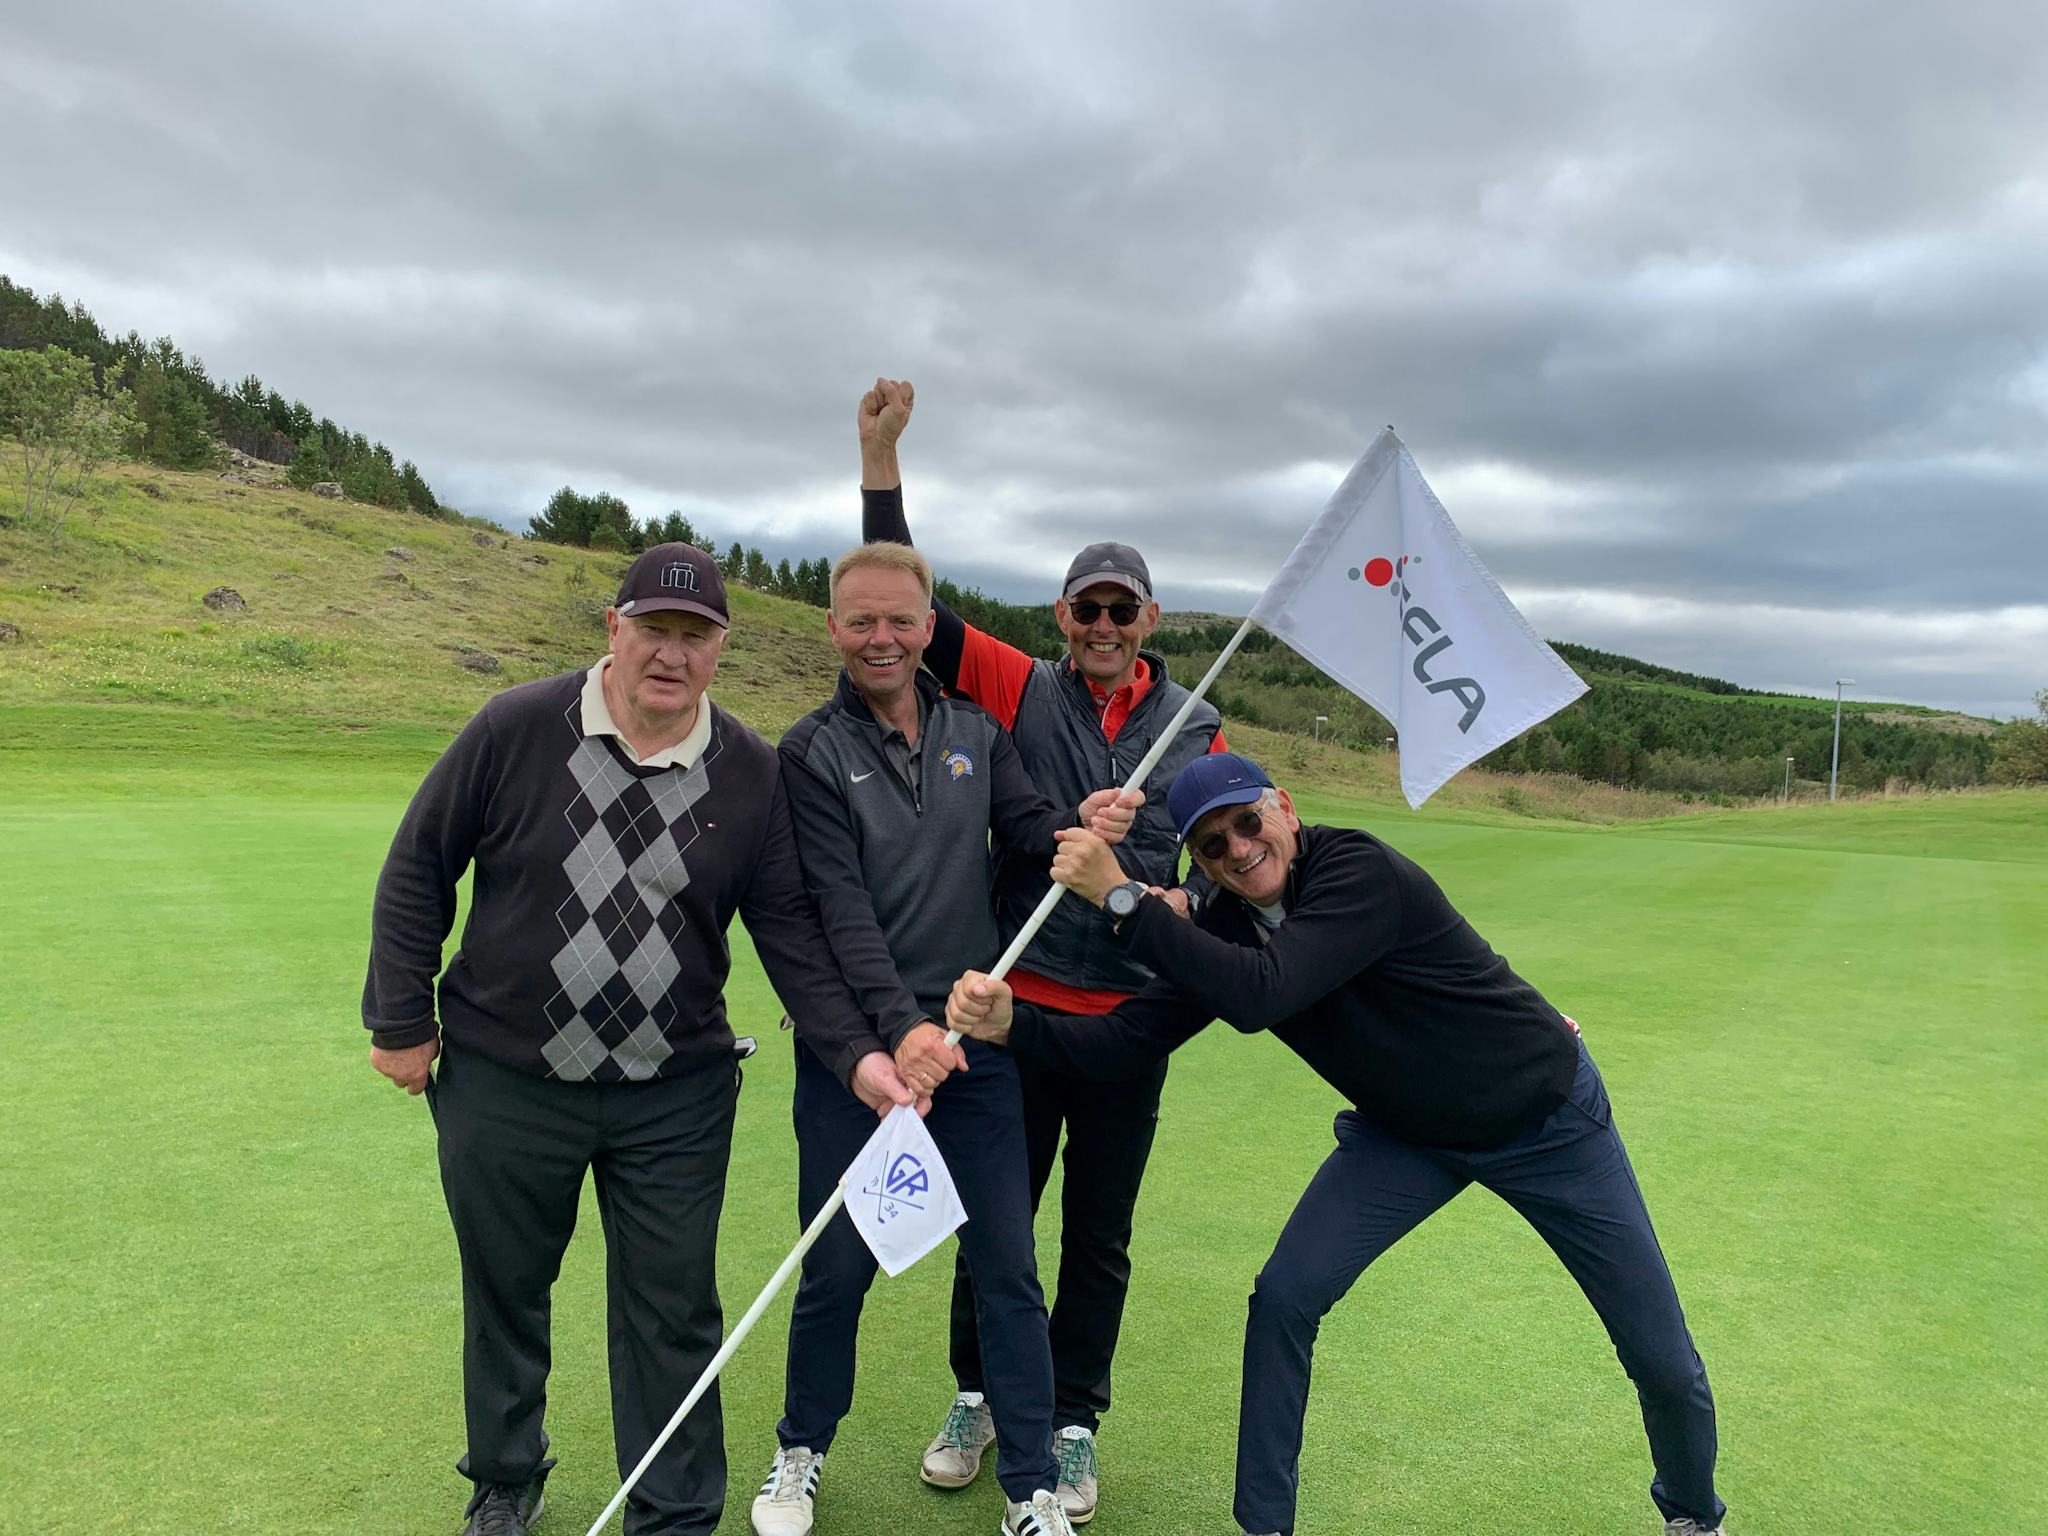 Four men posing joyfully on a golf course with one of them holding a flagstick